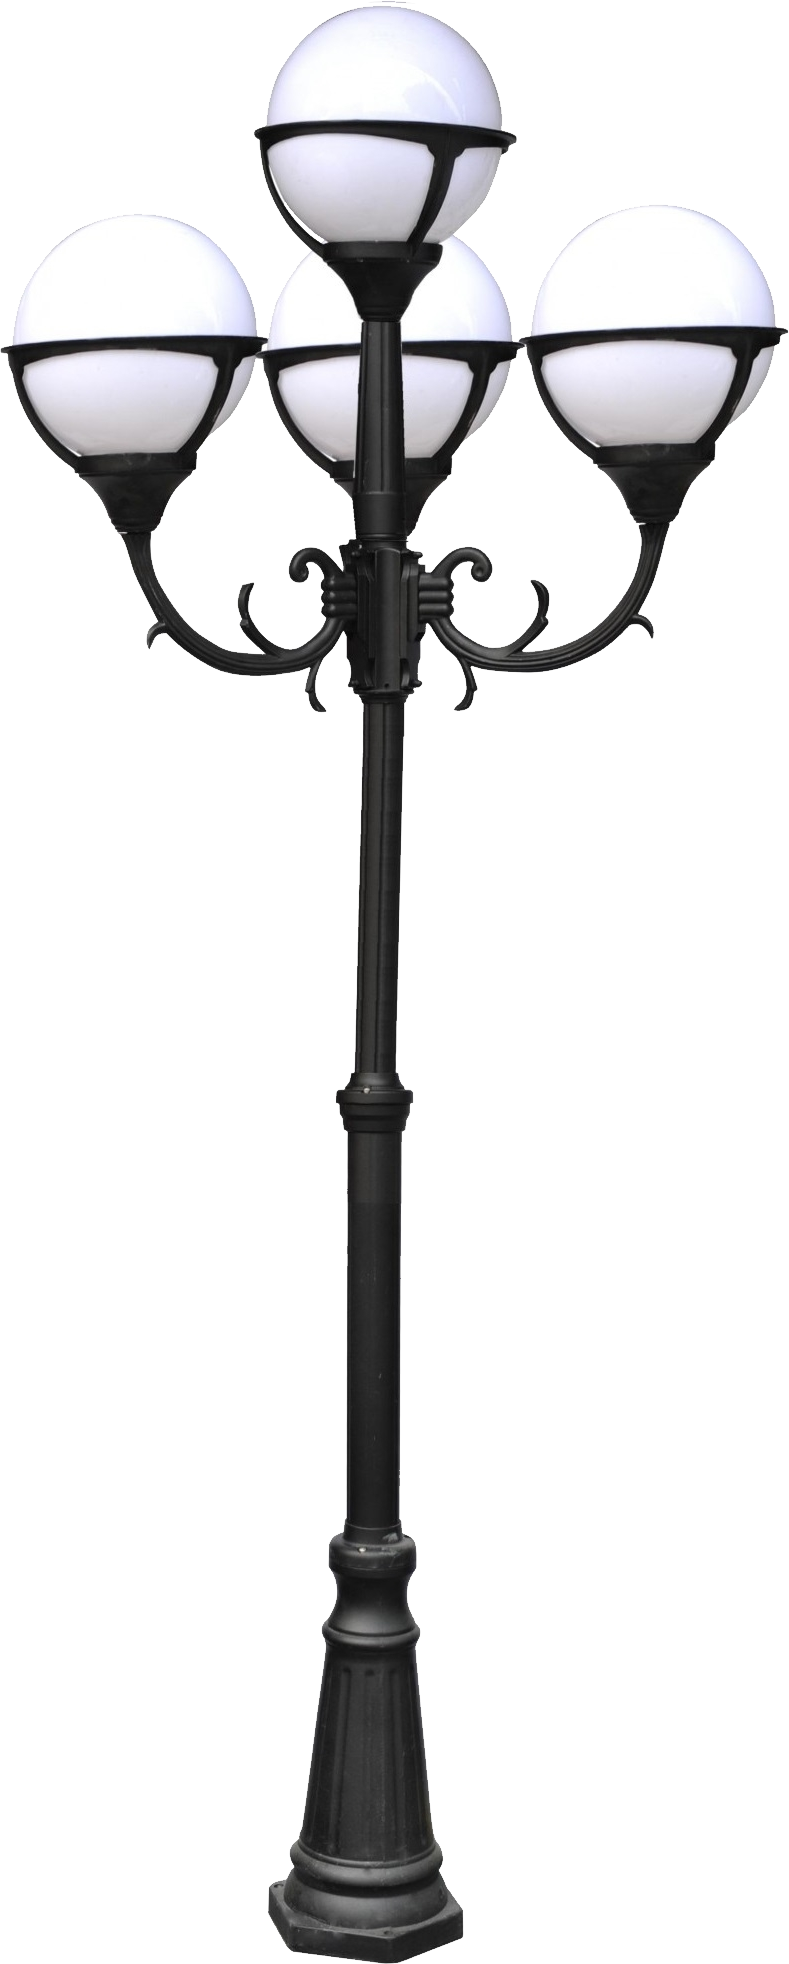 street light png image collections for download #20845